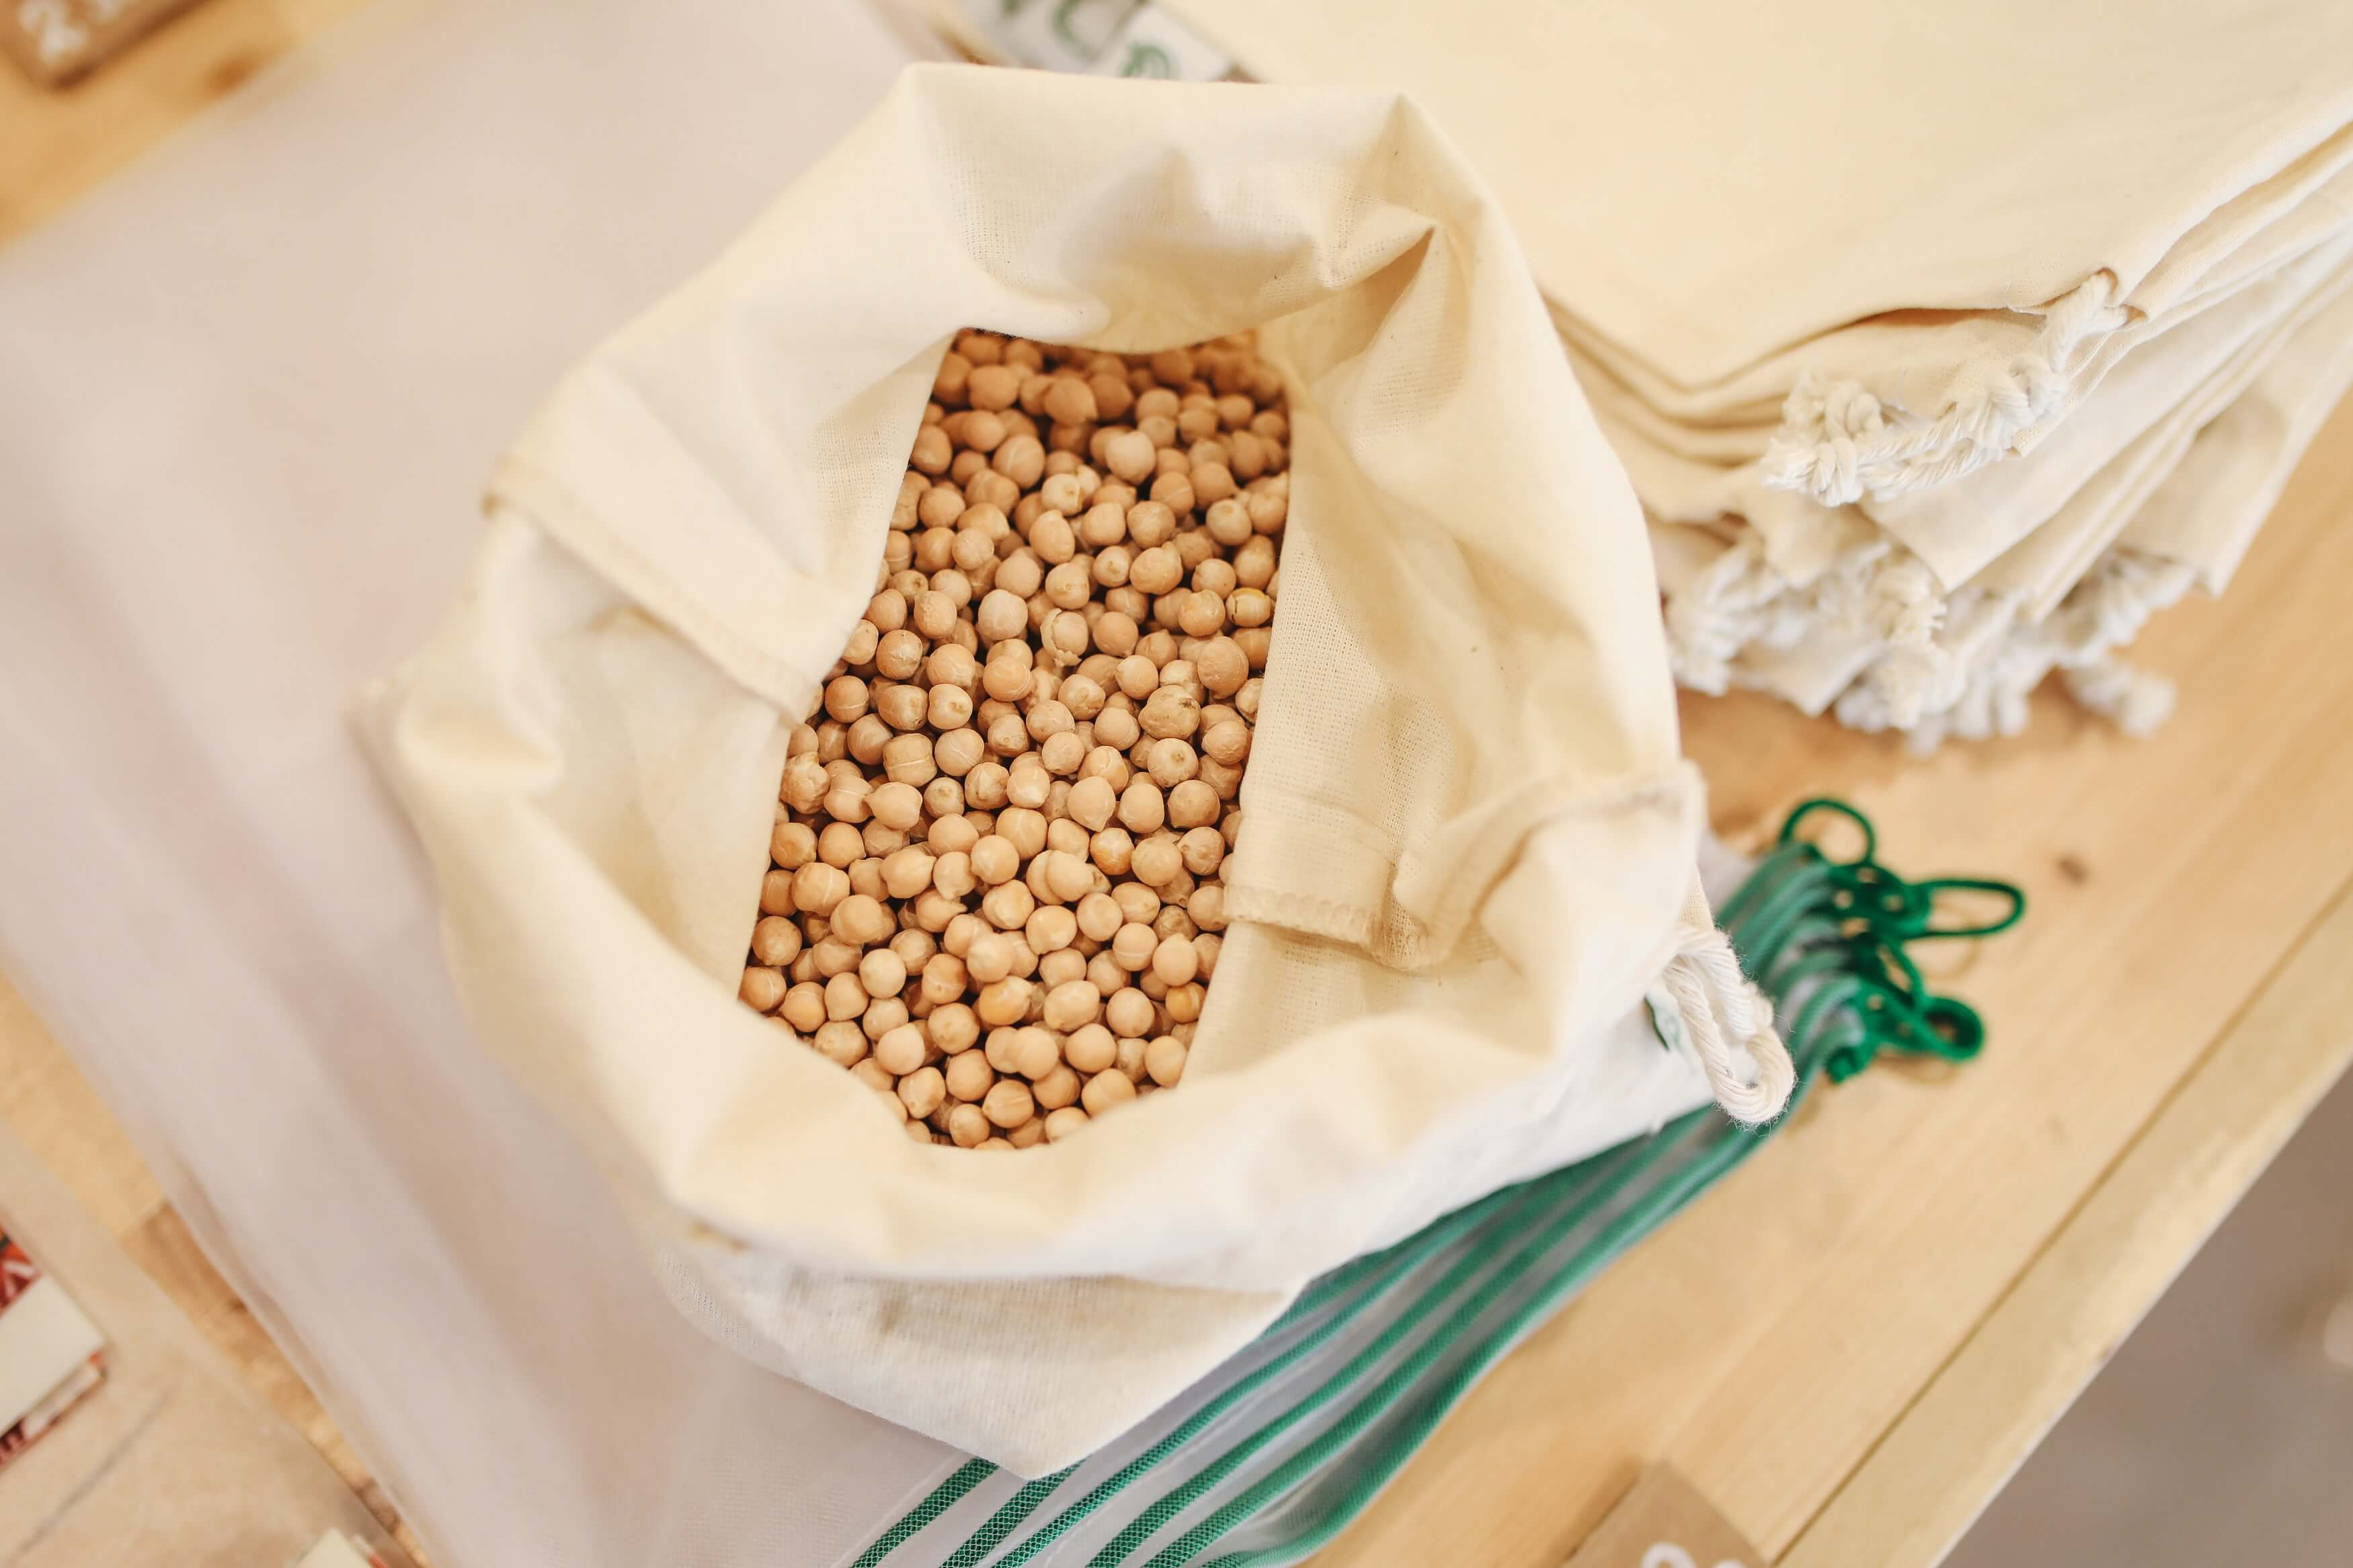 Soybean Production: A Potential Goldmine